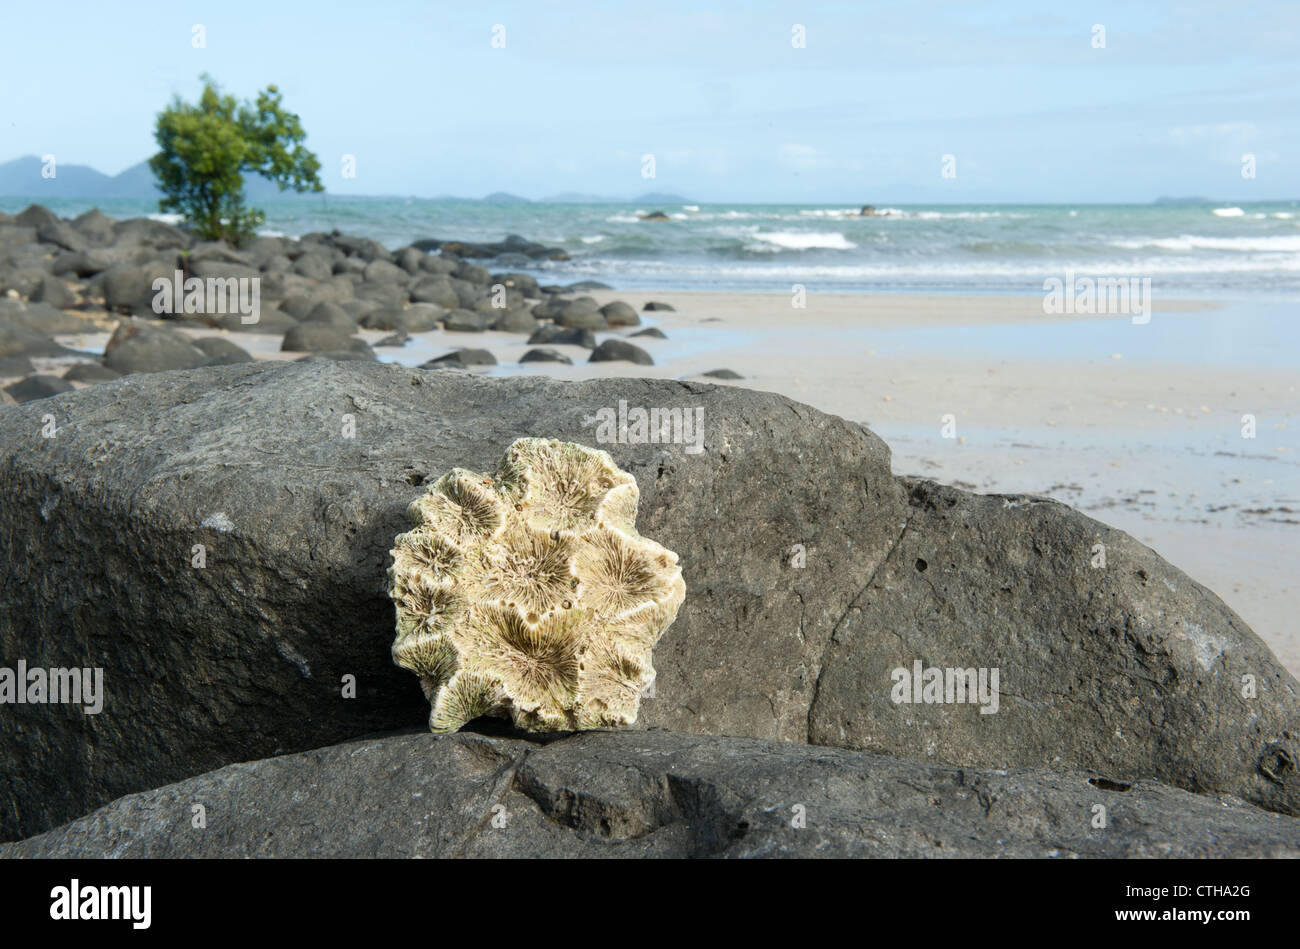 Pieces of coral found at Mission Beach on the Cassowary Coast of Far North Queensland,. Stock Photo